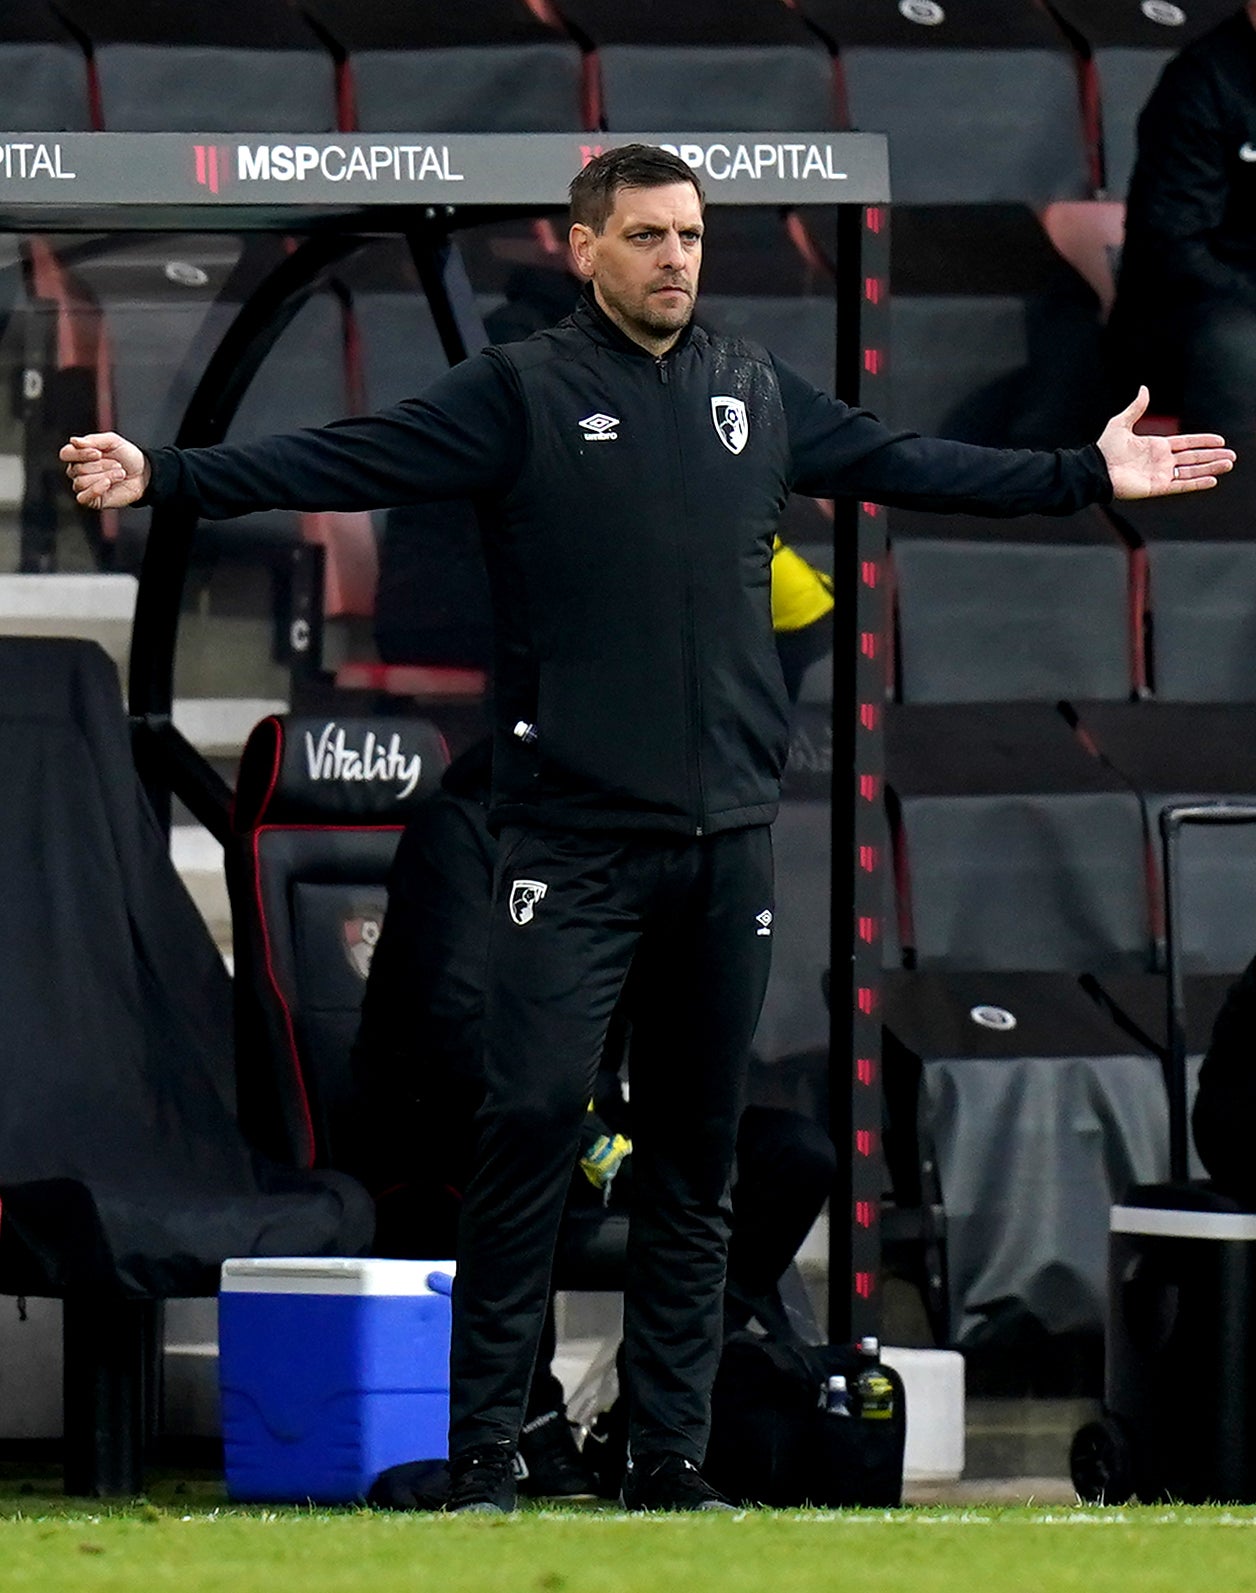 Jonathan Woodgate will not stay on at Bournemouth when the club appoint a new full-time manager